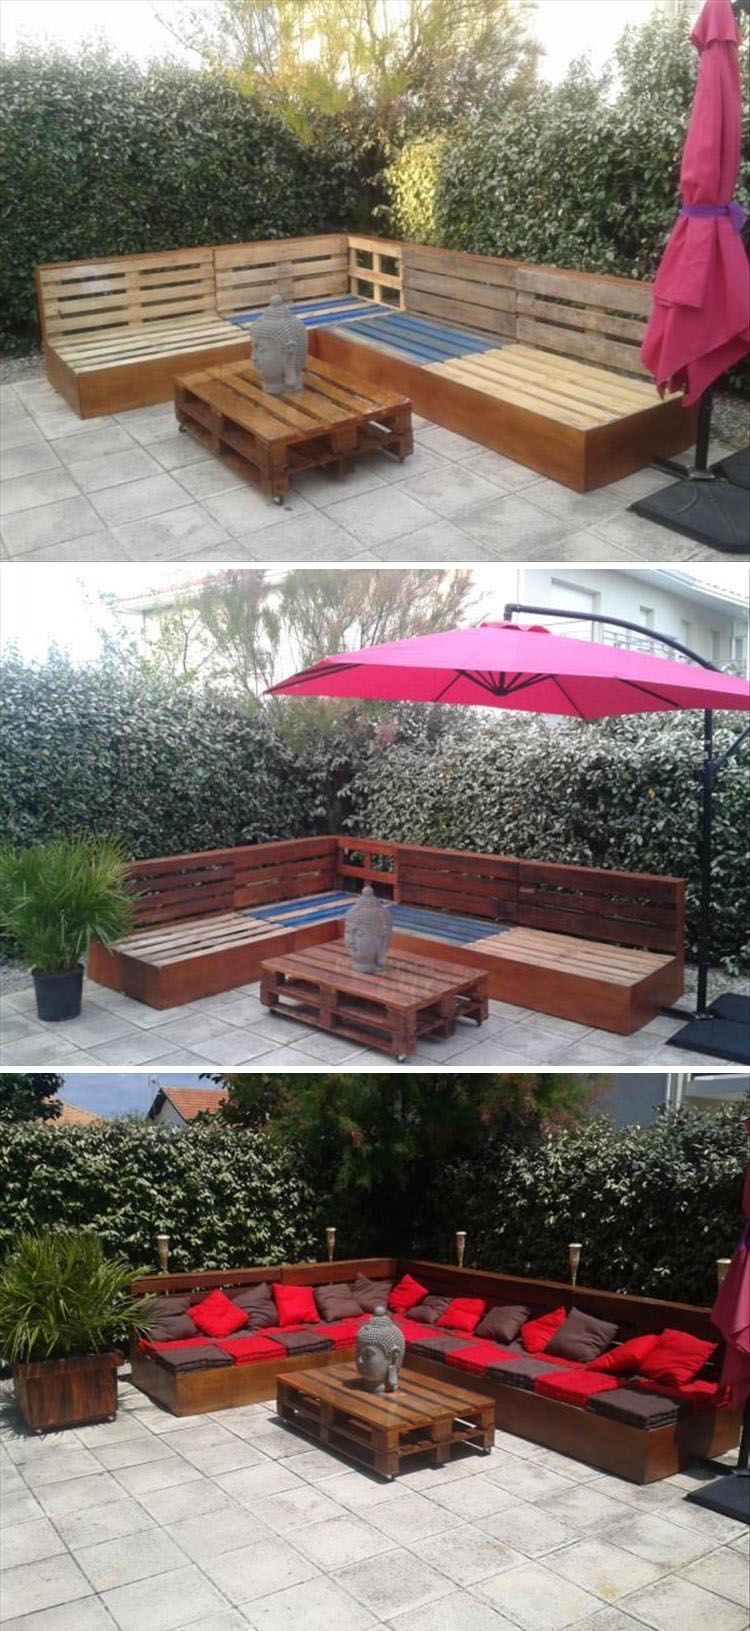 Amazing Uses For Old Pallets - 13 Pics -   25 garden seating pallets
 ideas